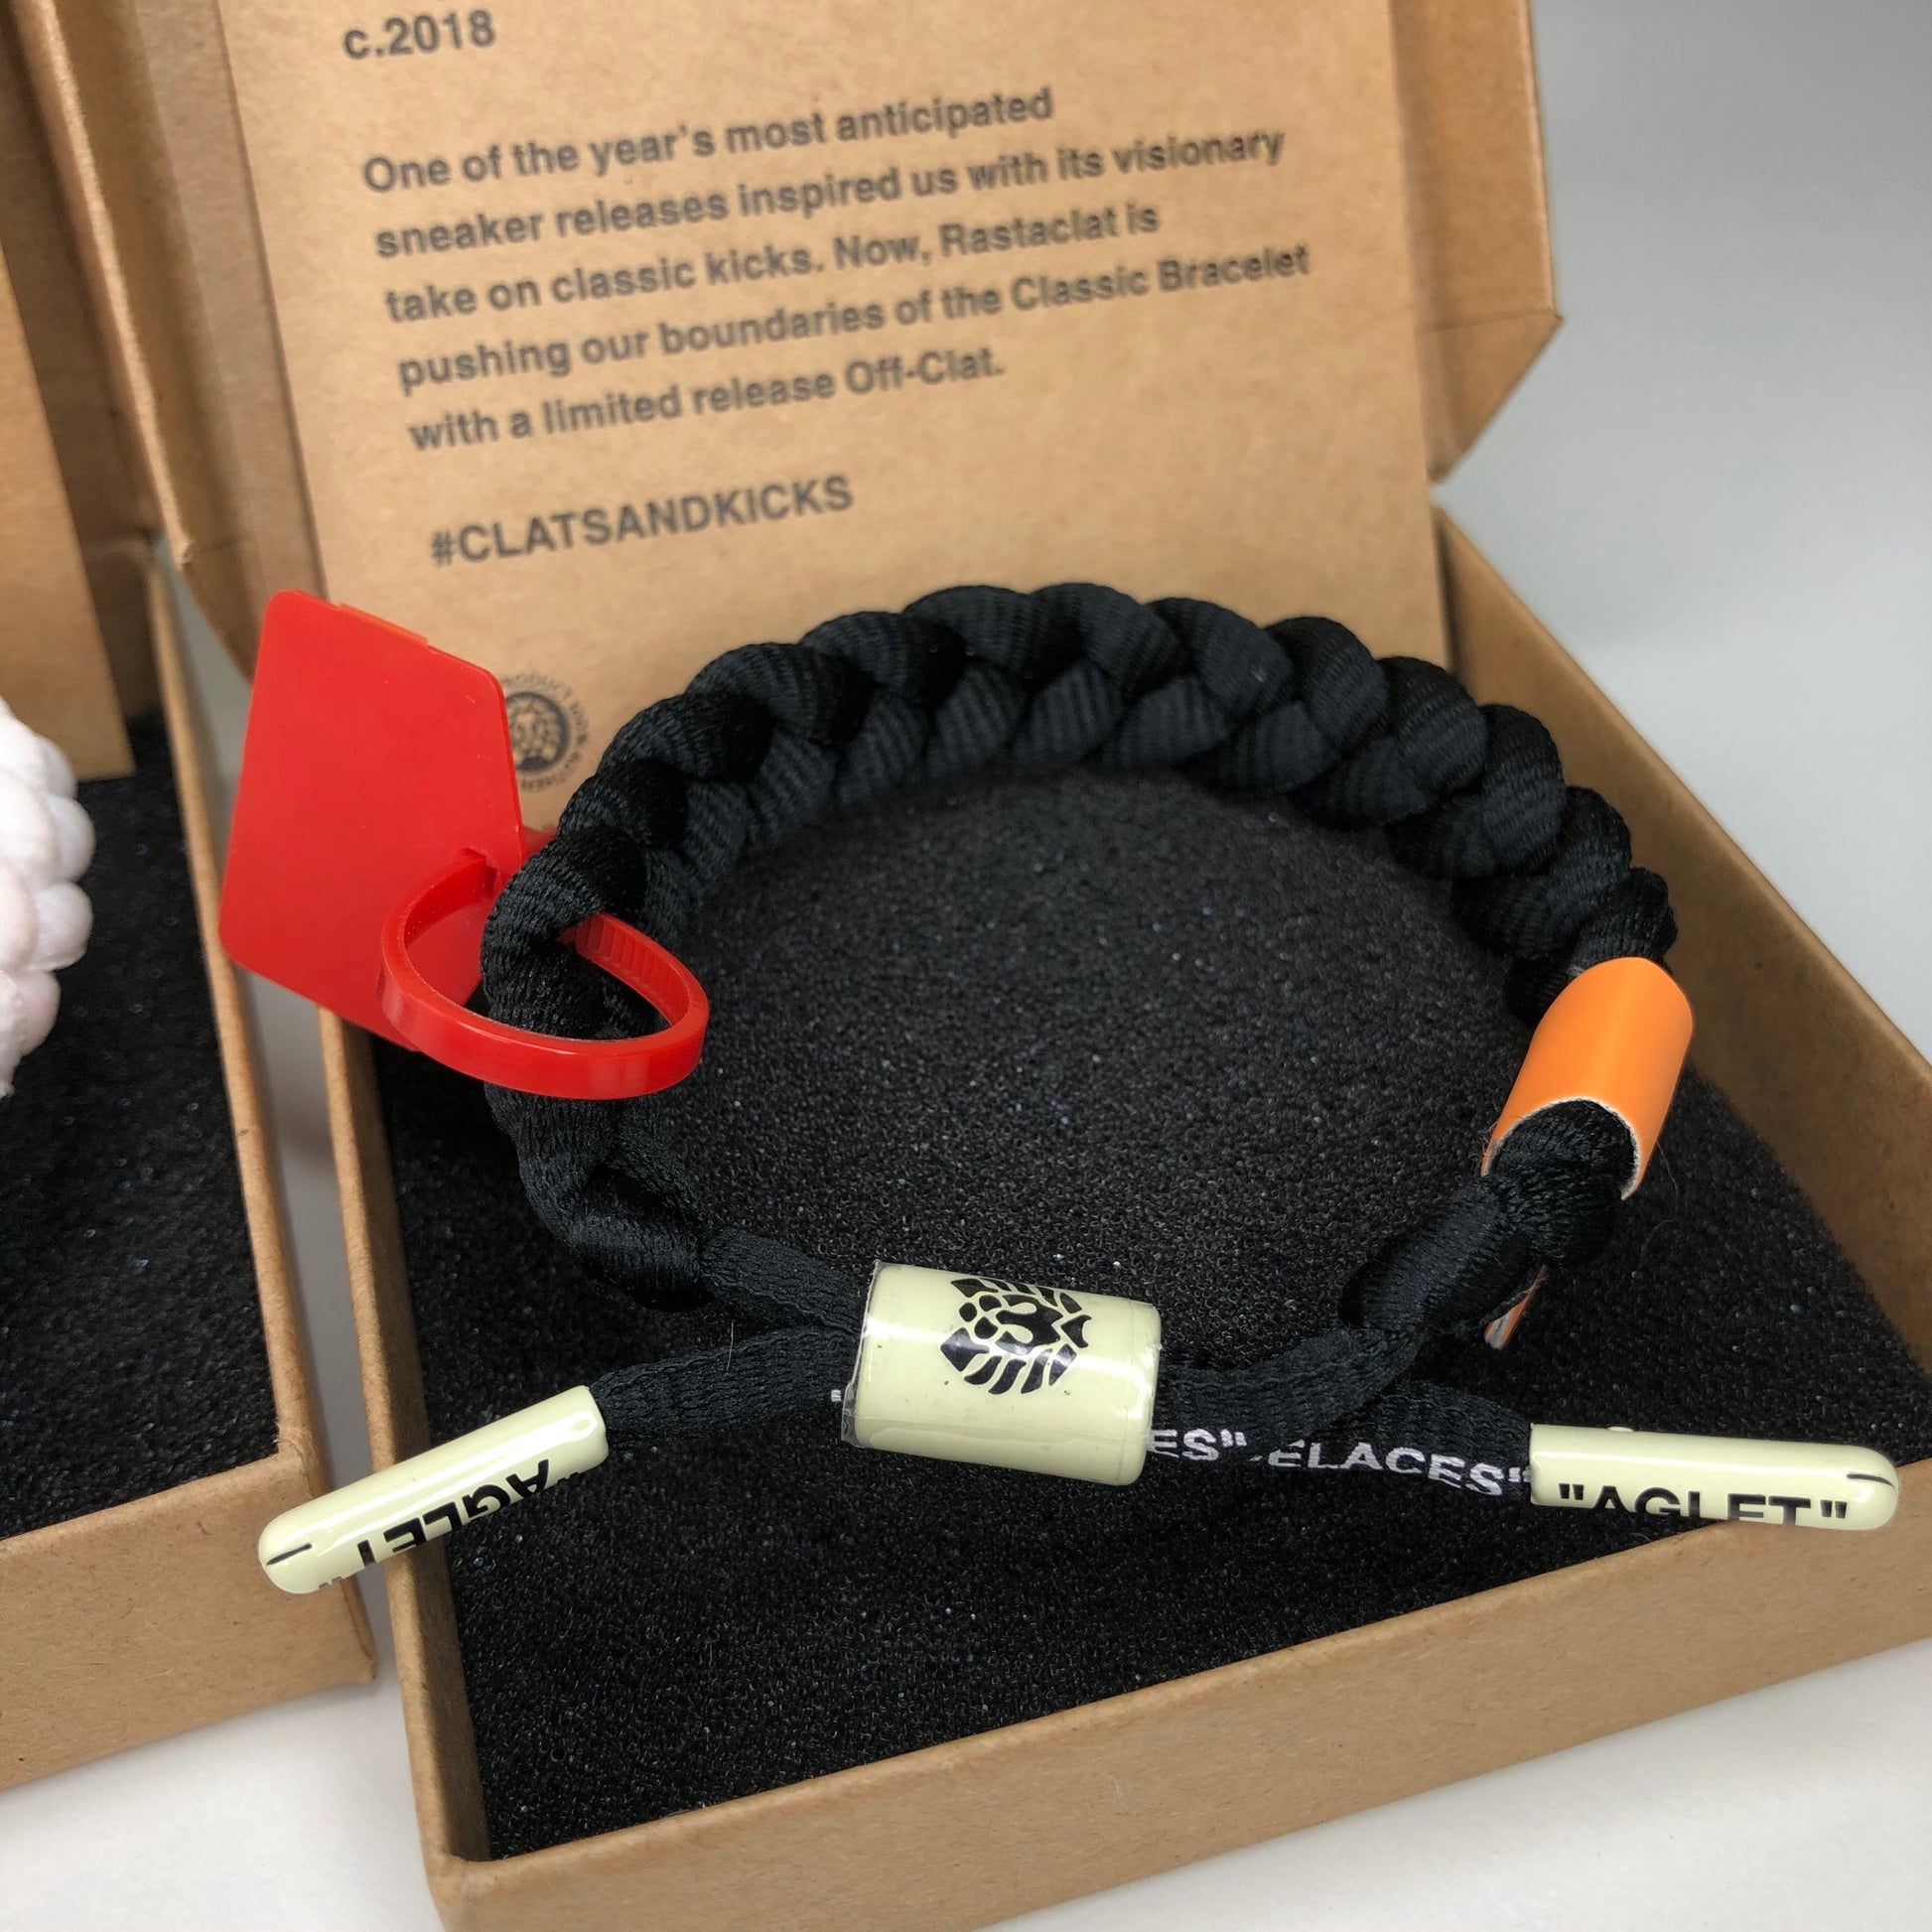 Off-White Rastaclat Bracelet - Shop Streetwear, Sneakers, Slippers and Gifts online | Malaysia - The Factory KL